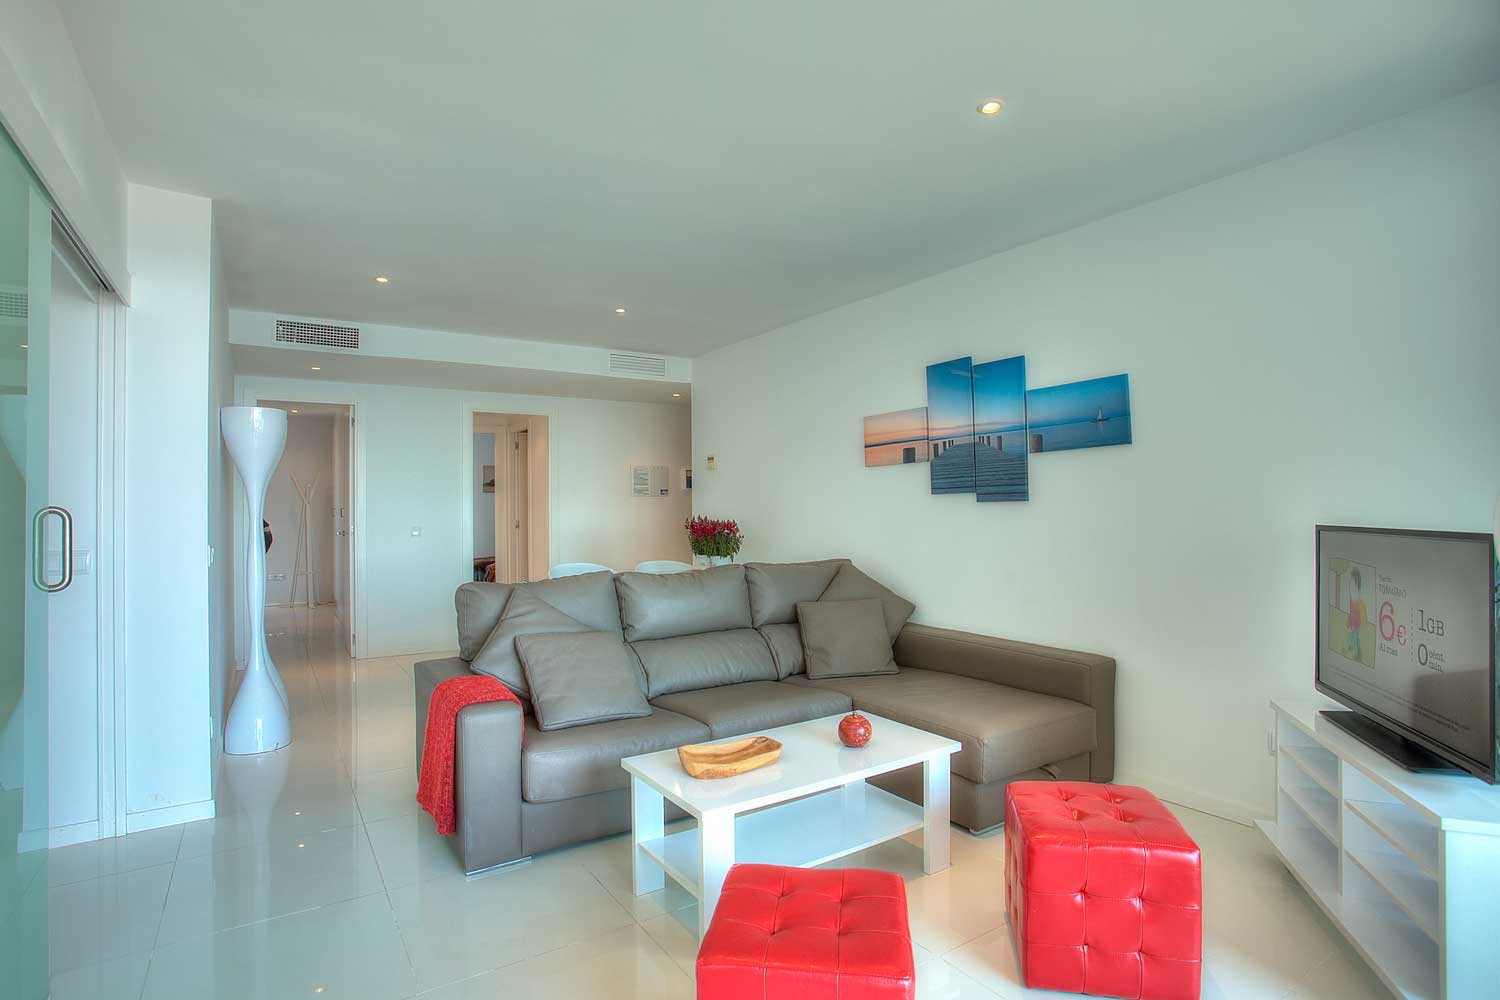 Fantastic apartment with frontal sea views, for sale in Playa d'en Bossa, Ibiza